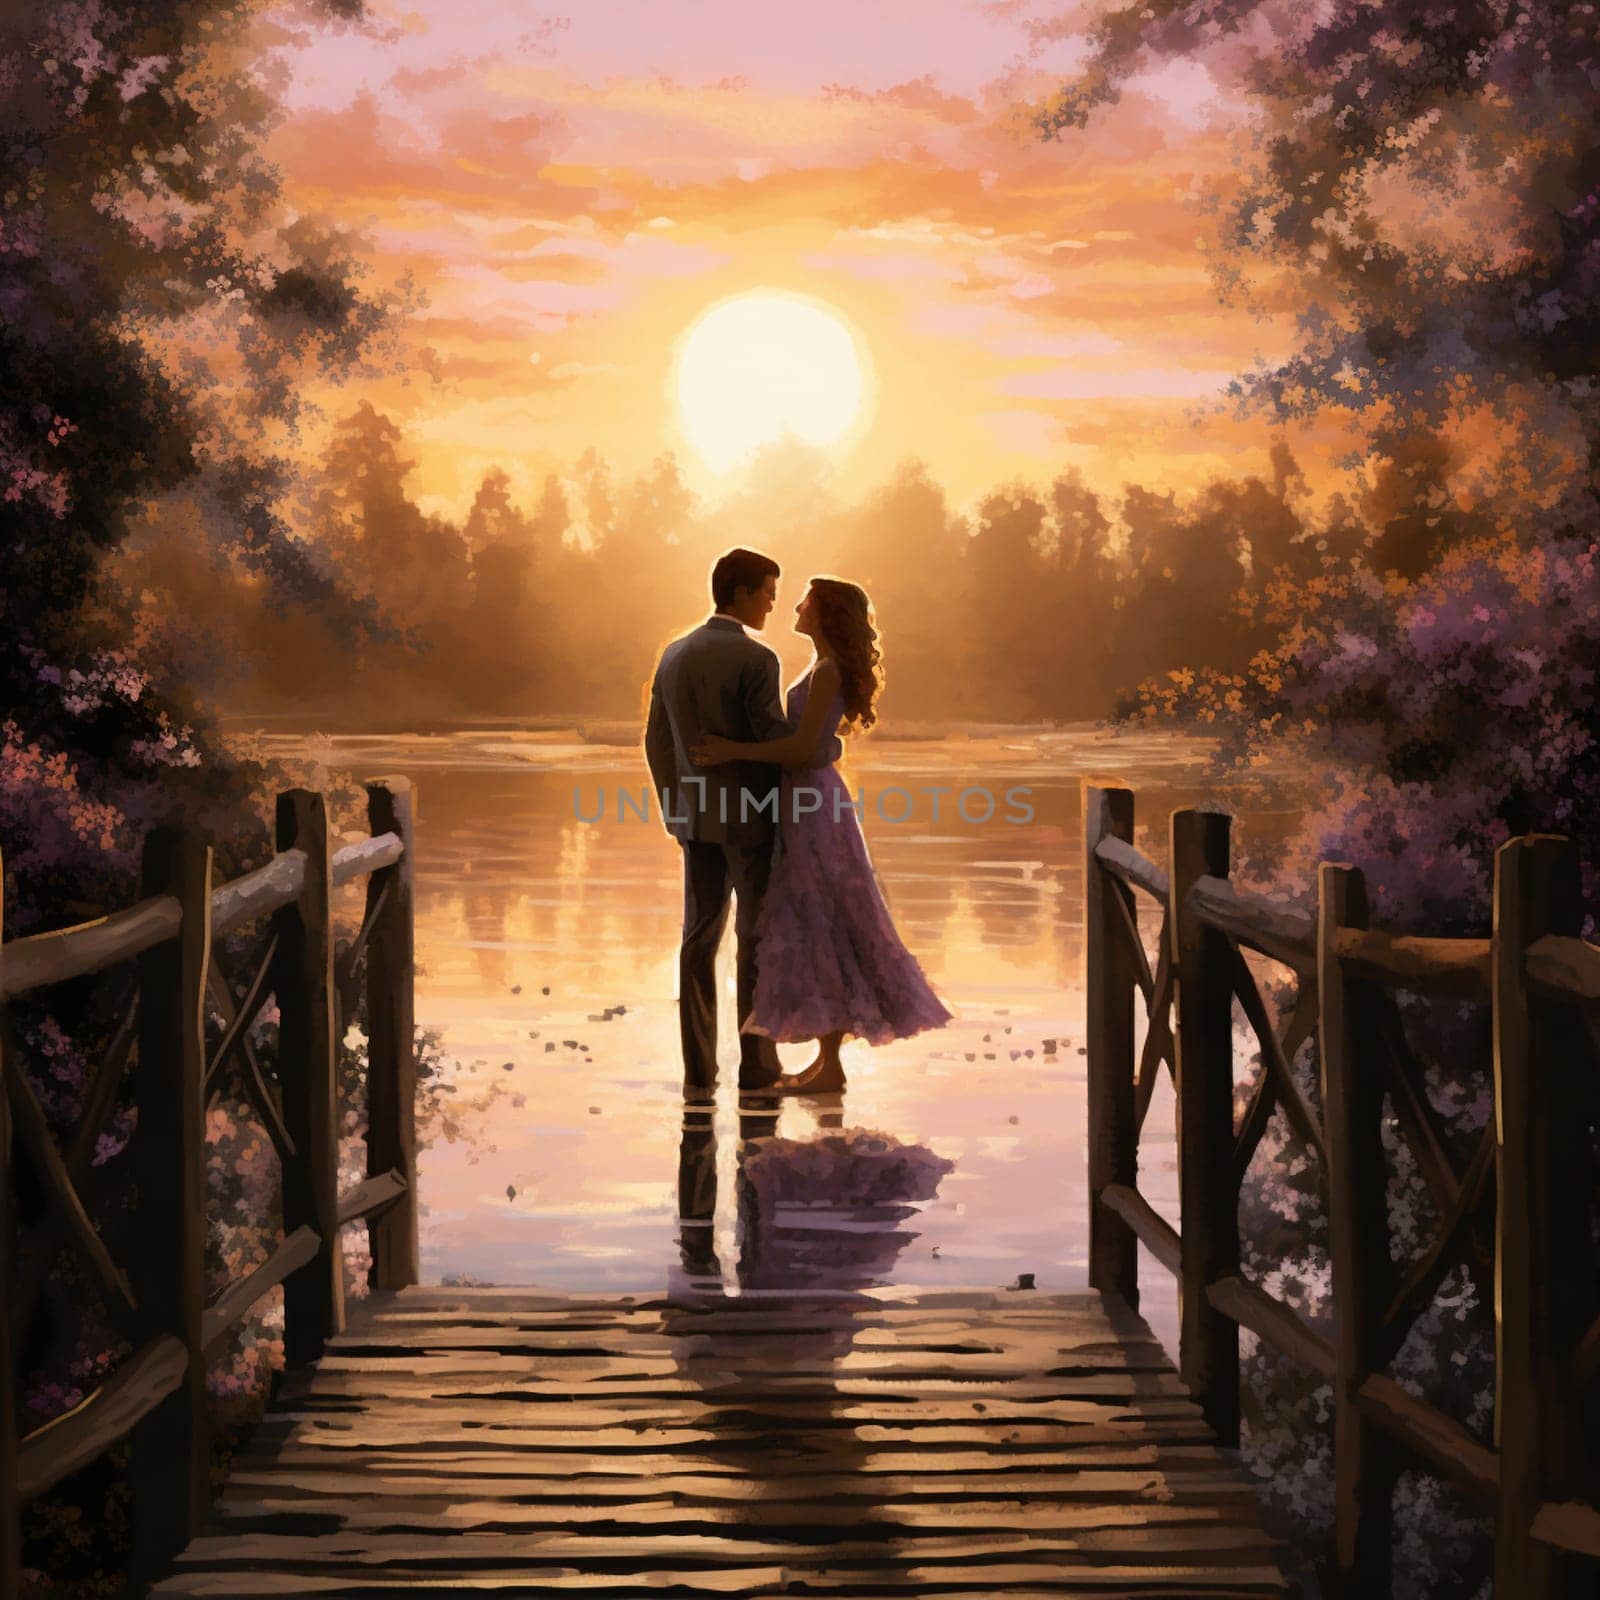 Serene scene on a rustic bridge at sunset, with exchanging vows by Sahin